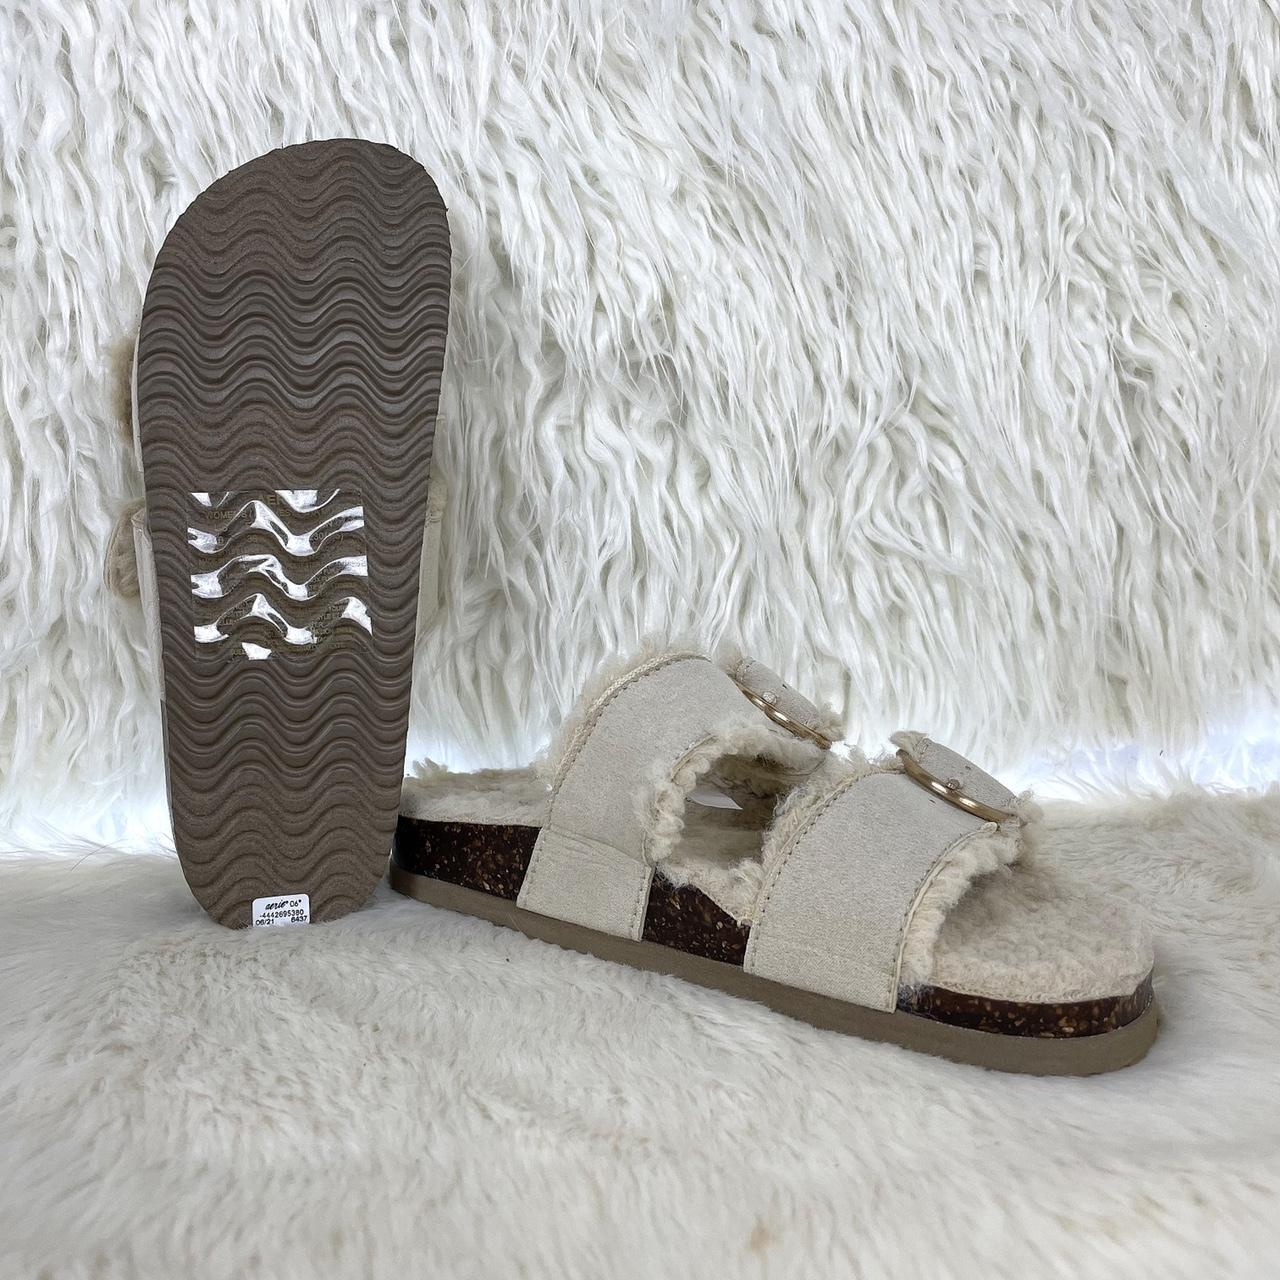 Aerie Women's Cream and Brown Sandals (4)